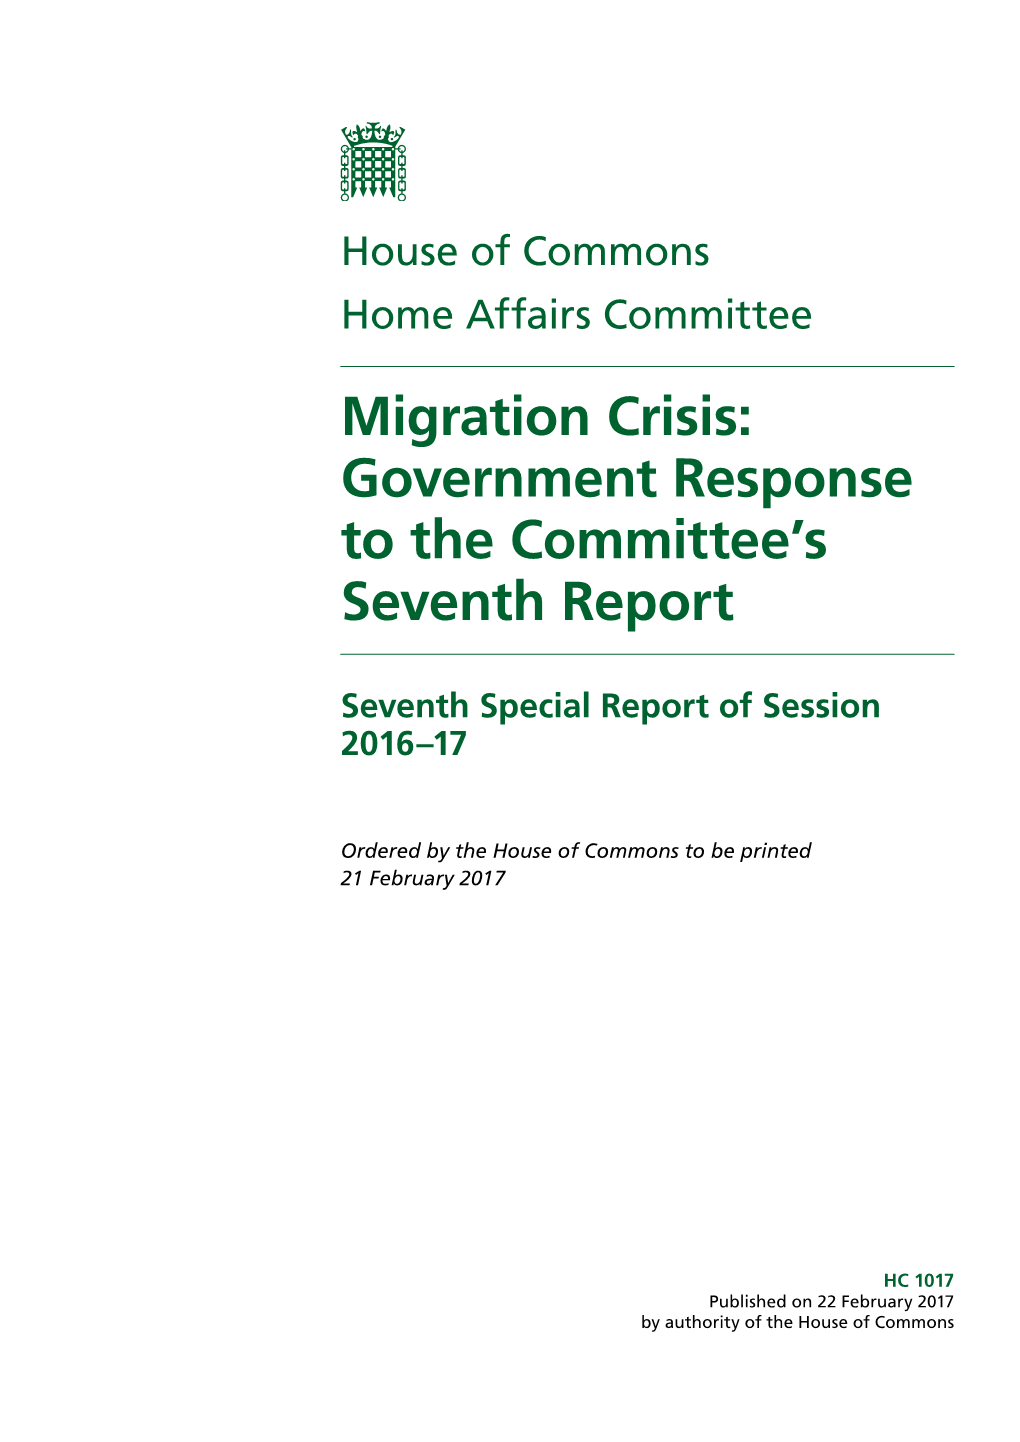 Migration Crisis: Government Response to the Committee’S Seventh Report